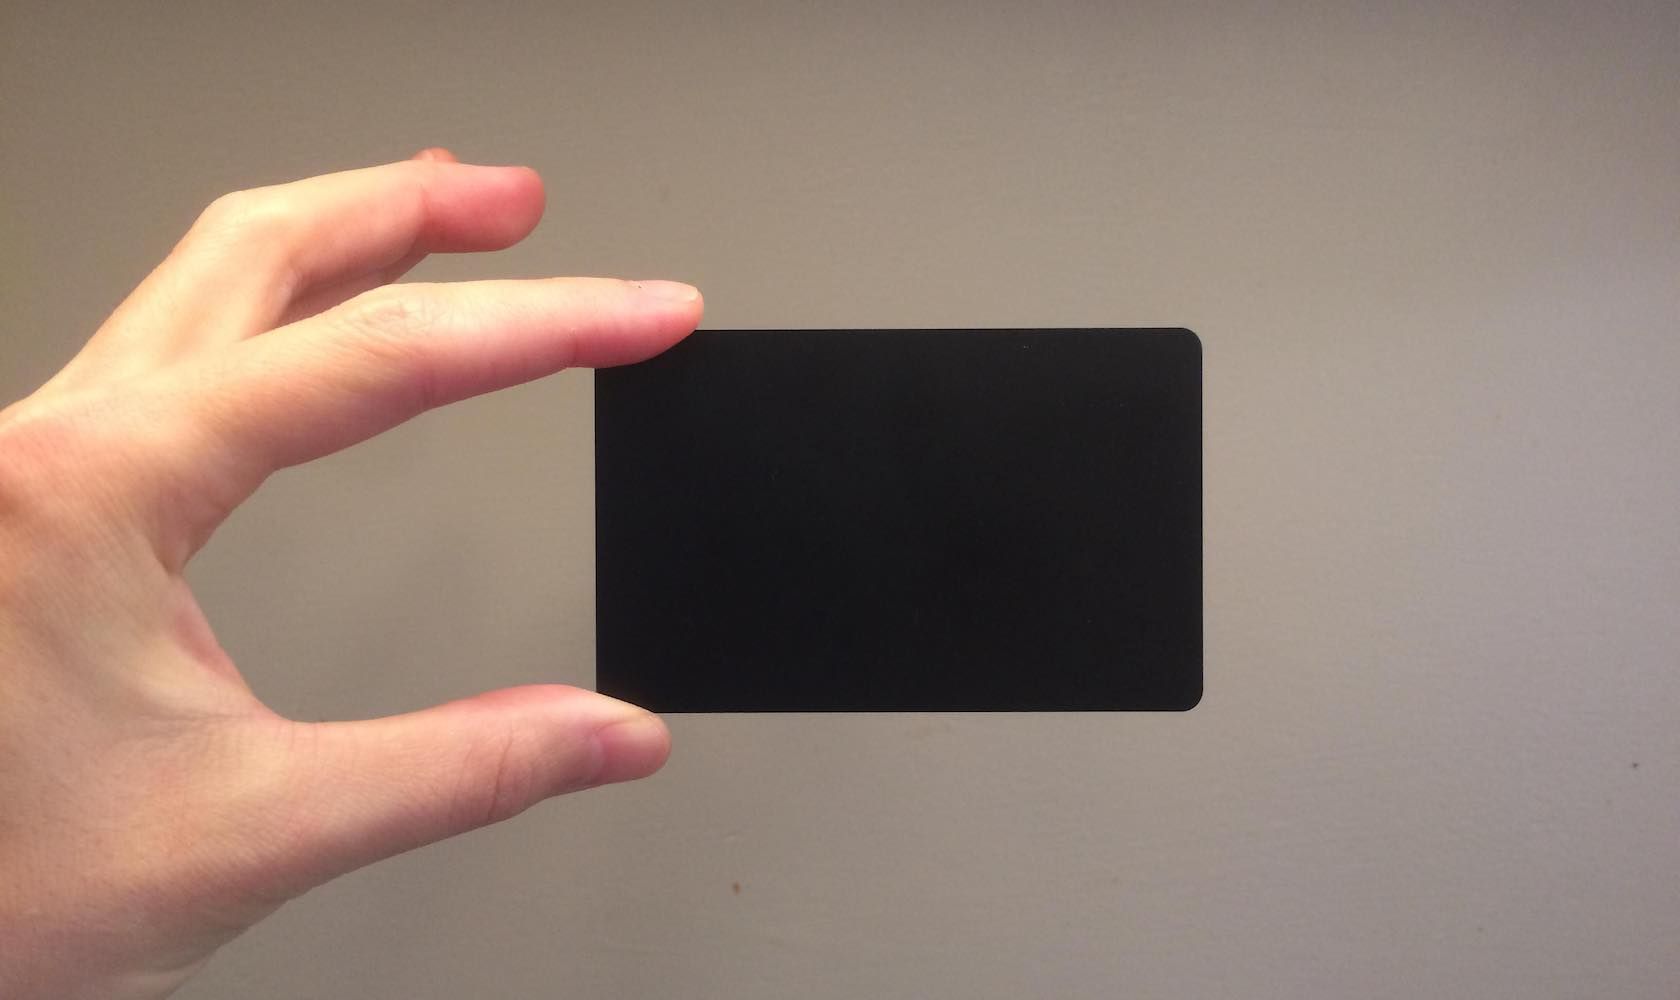 A black NFC card the size of a credit card.